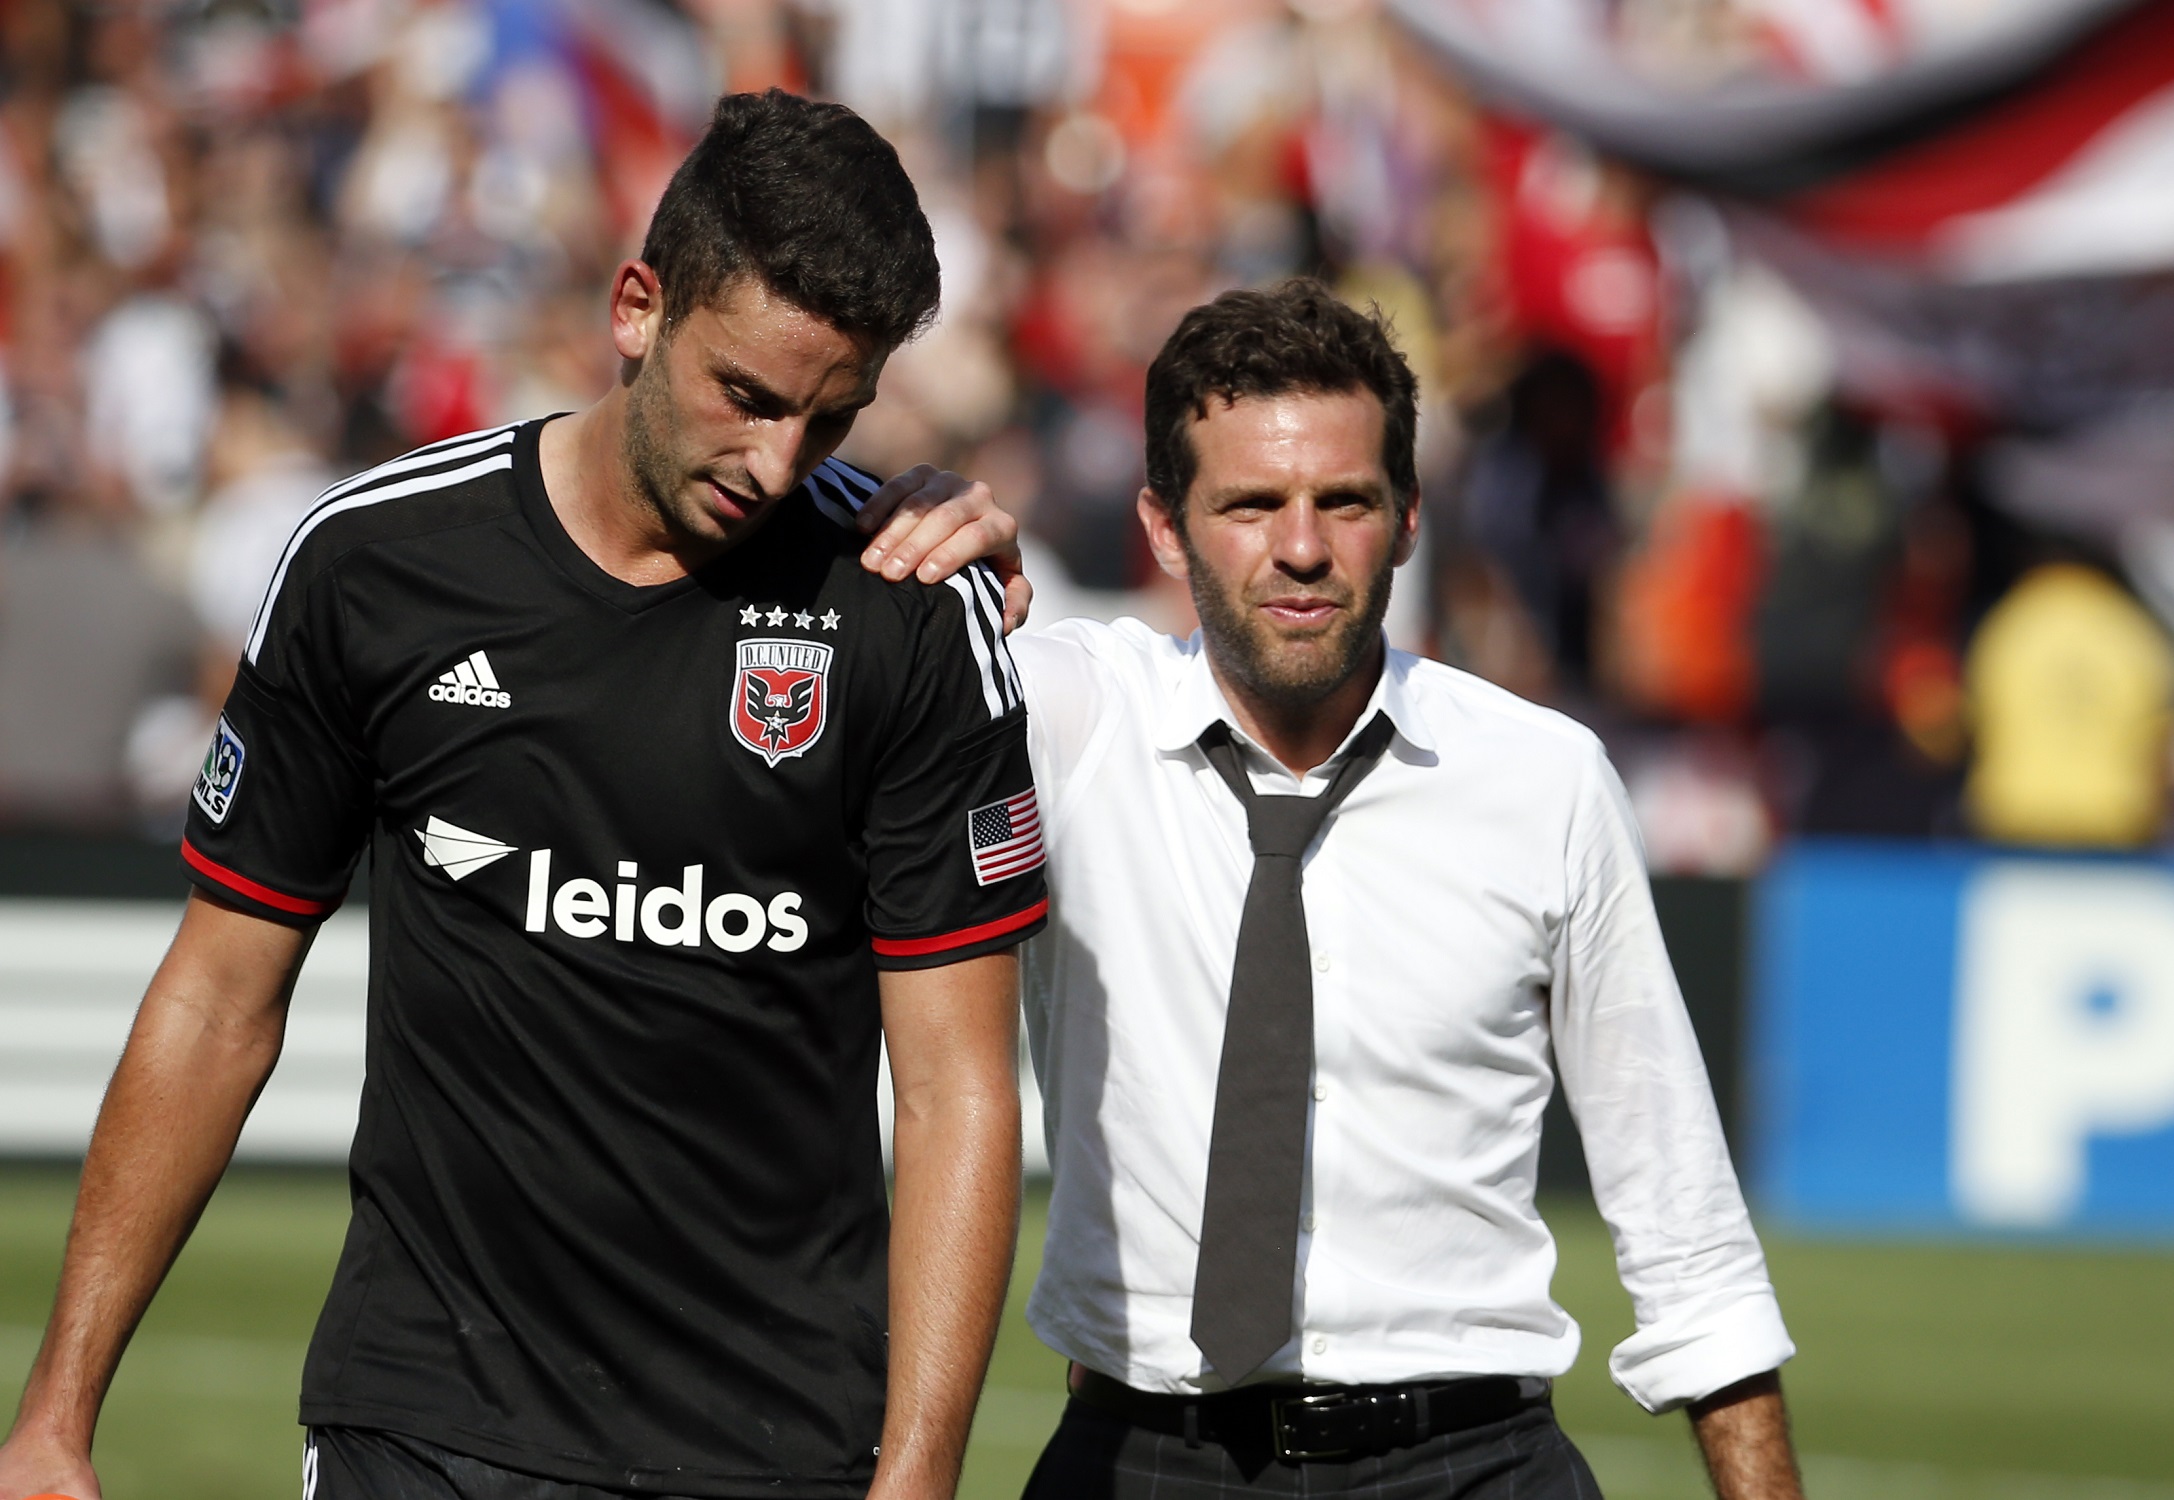 Ben Olsen out as head coach of DC United